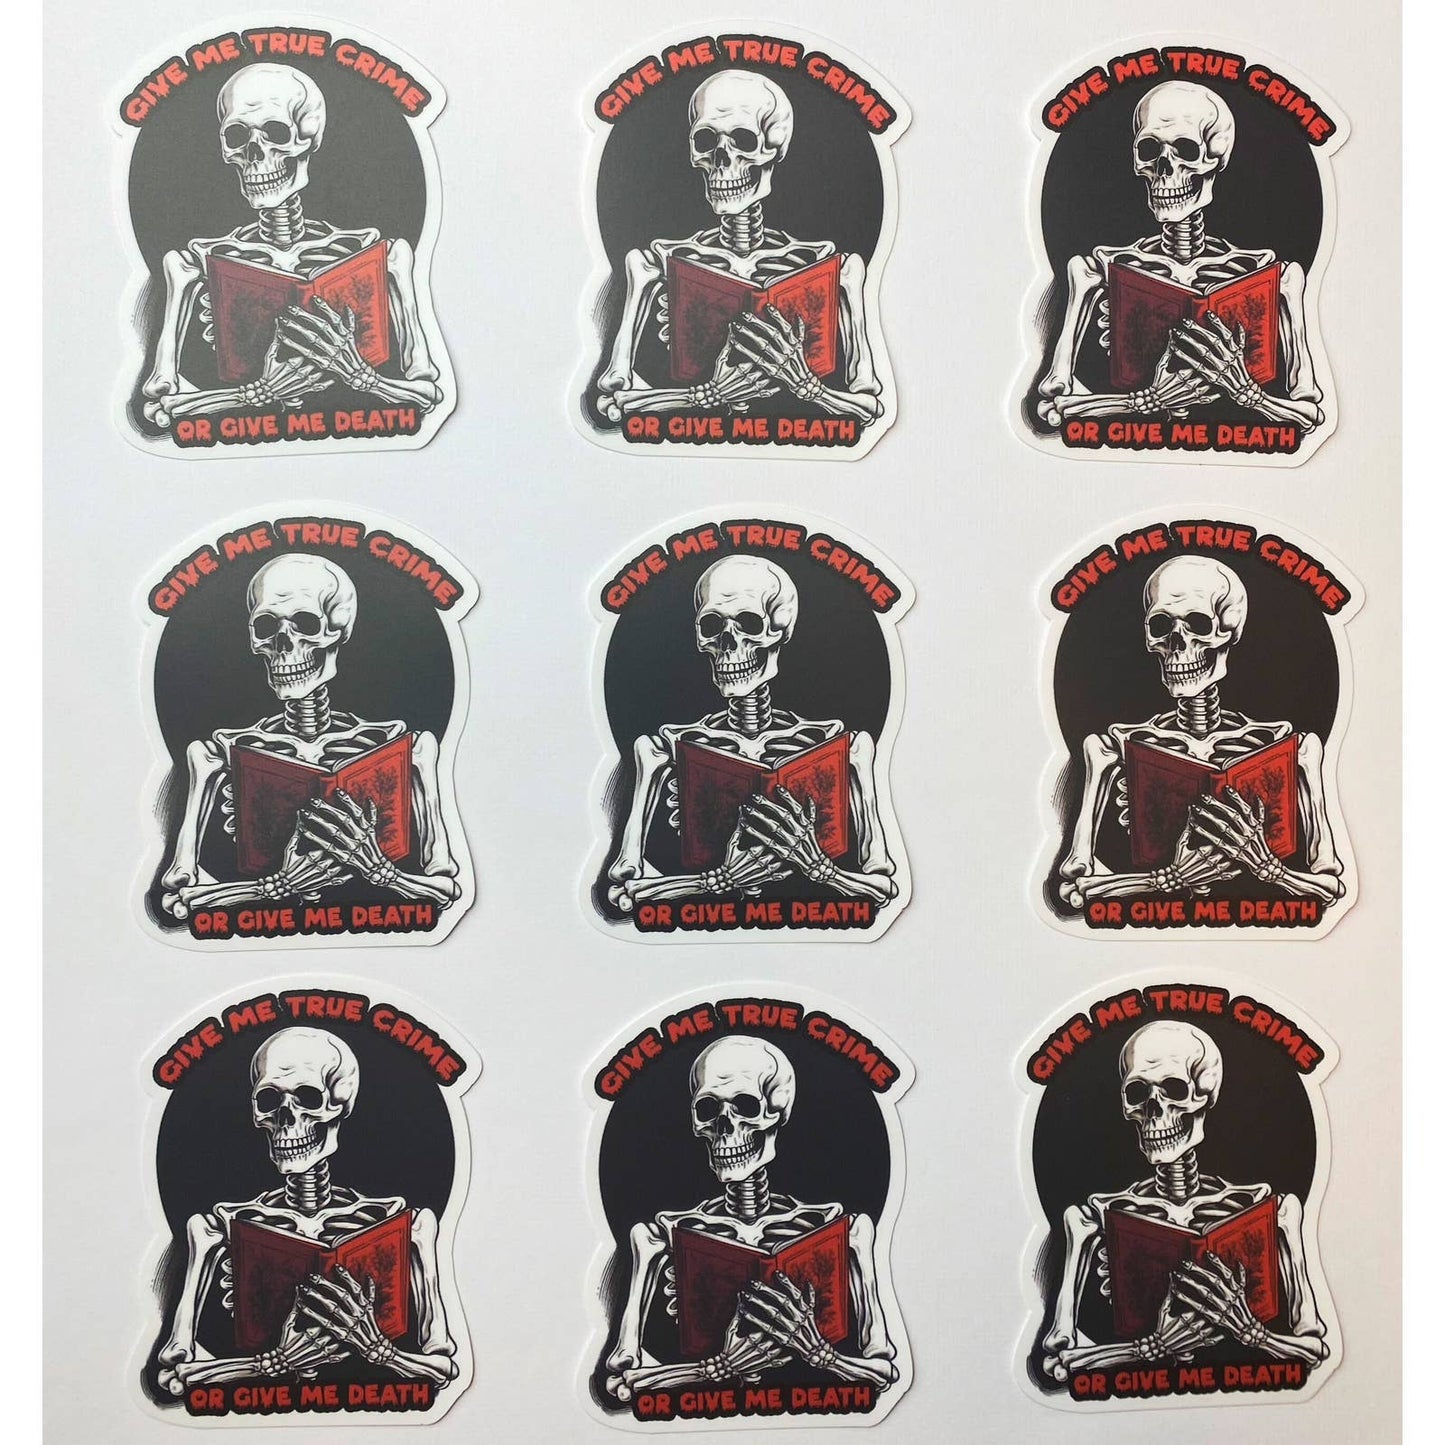 True Crime or Death Sticker, Skeleton with Book for True Crime Fans, Reading, Reader Sticker Maroon and Black for Mystery lovers